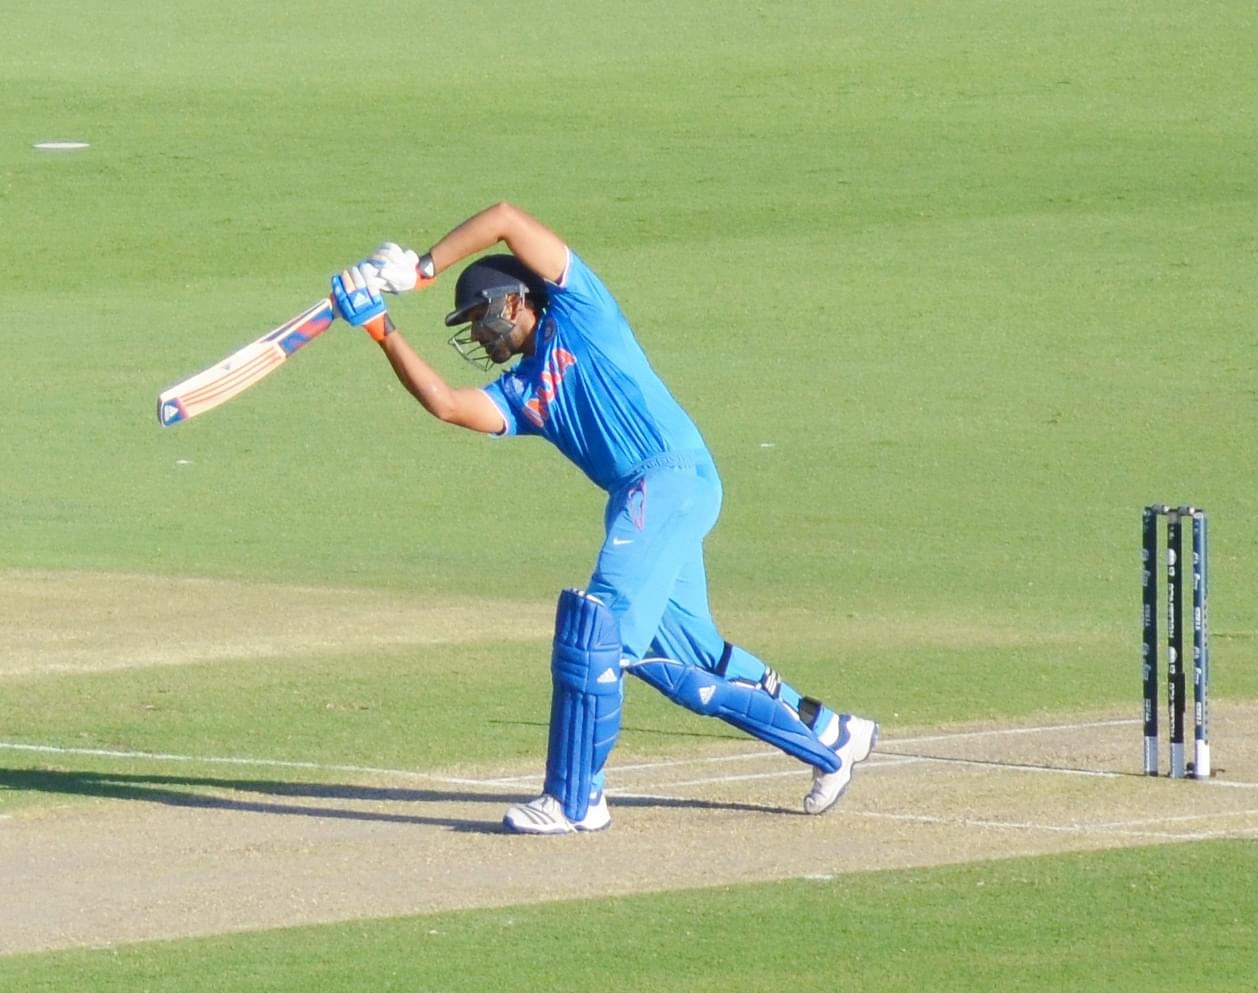 Twitter reactions on Rohit Sharma's fourth T20I century